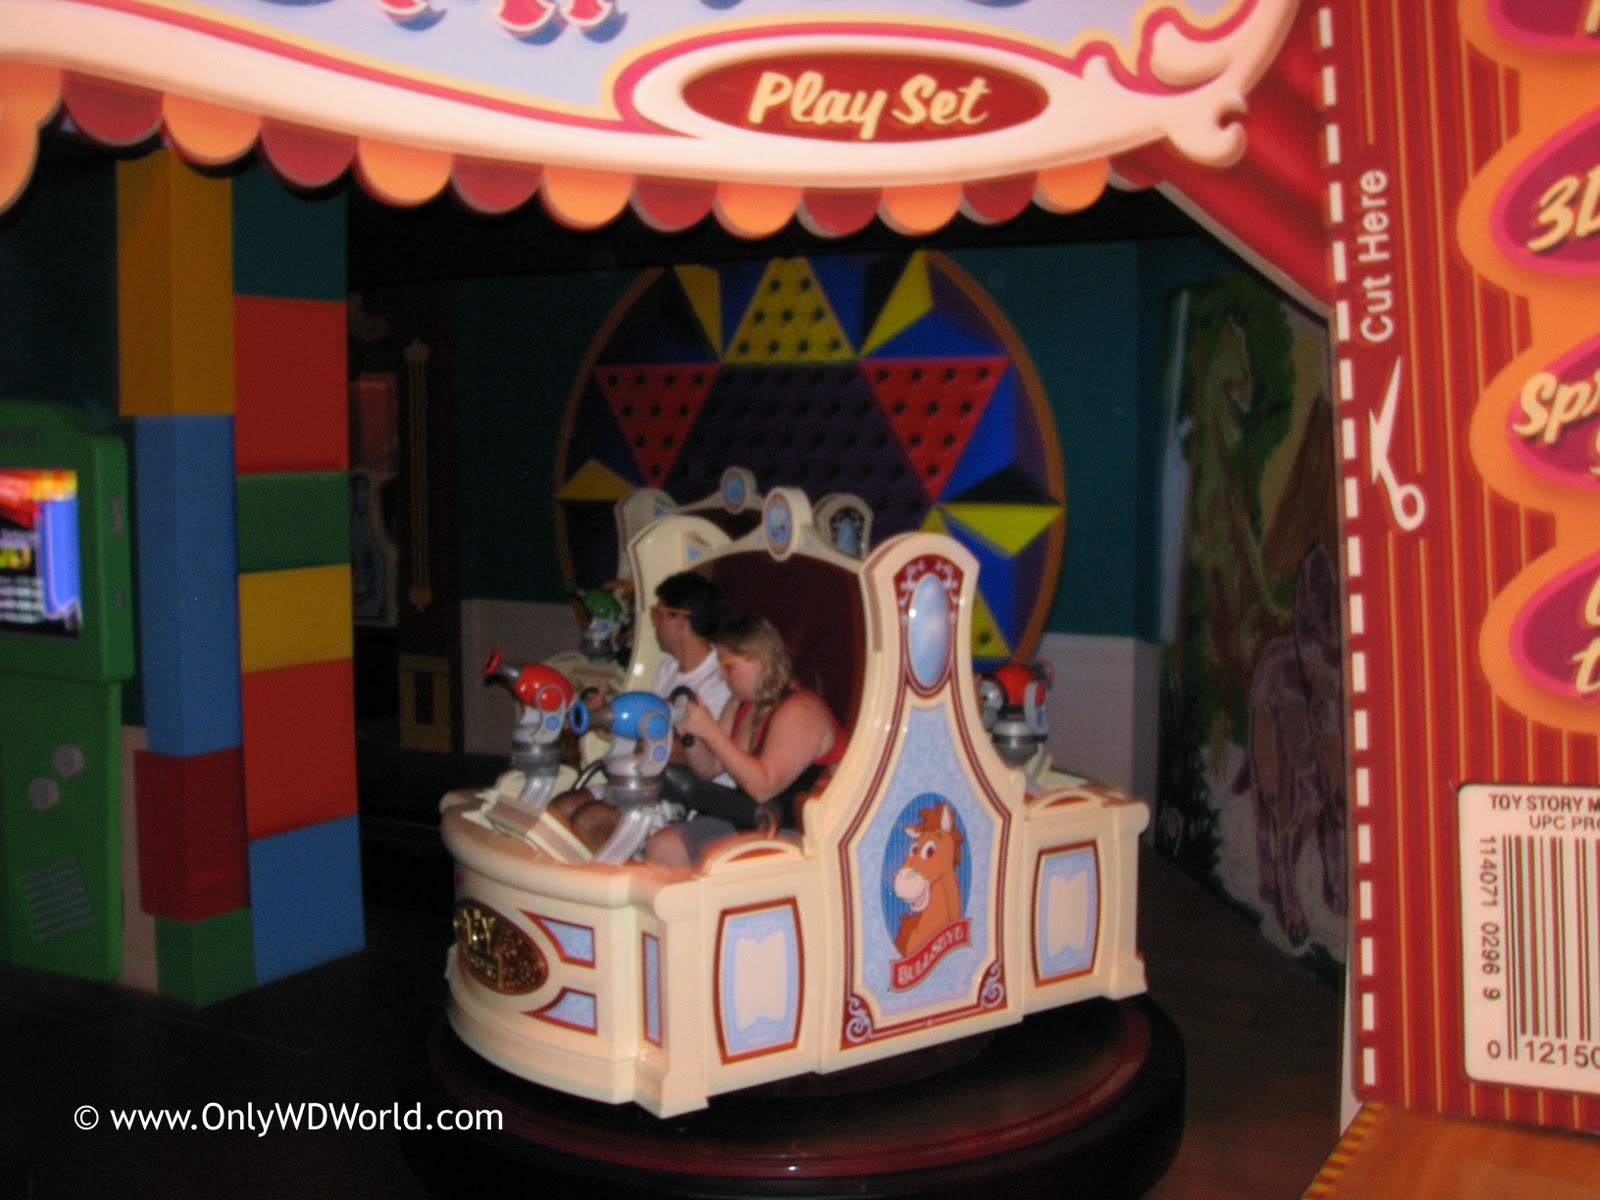 Toy Story Midway Games Play Set